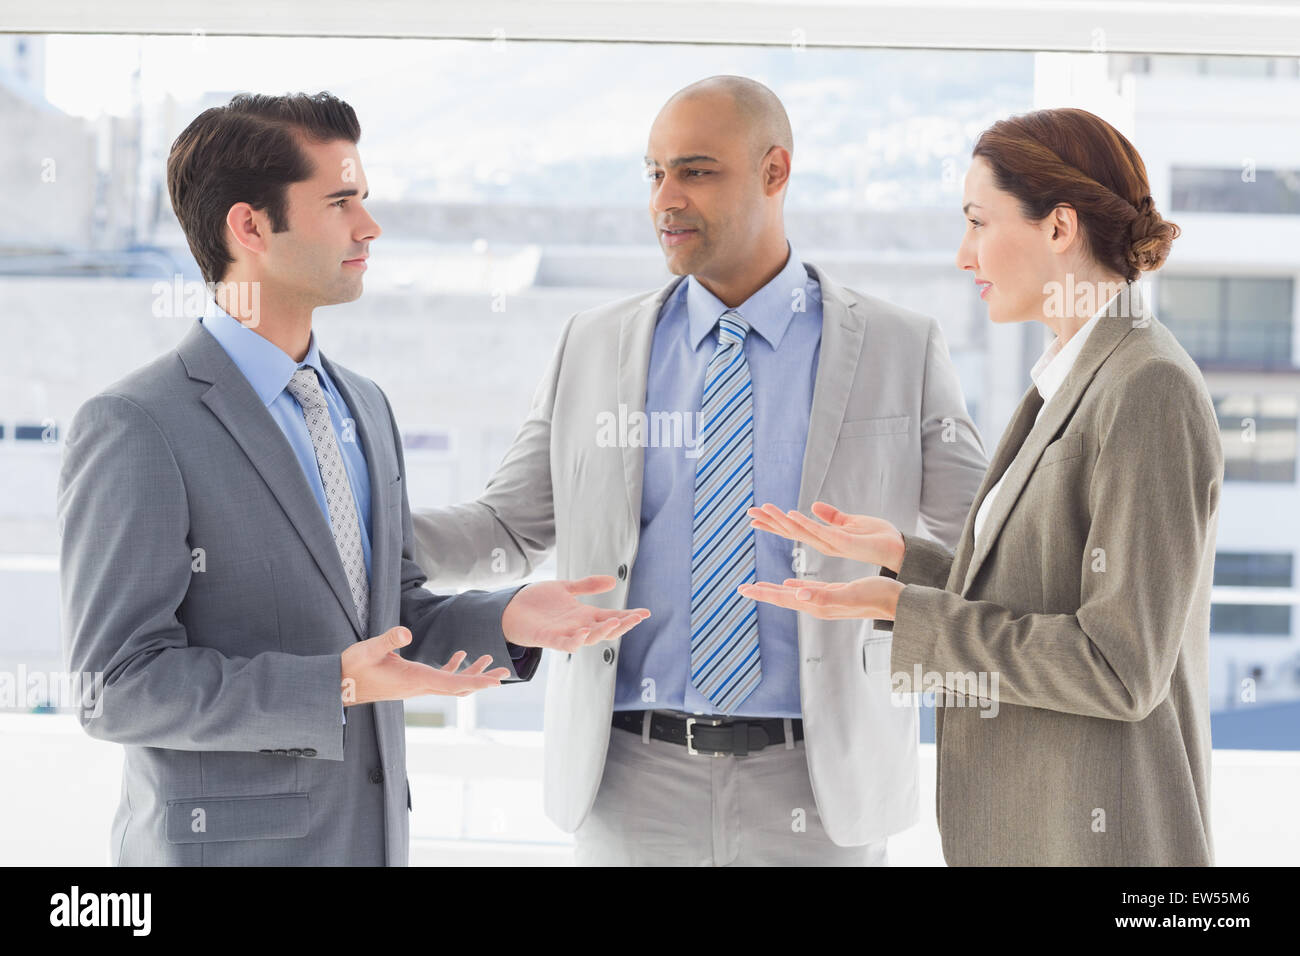 Business colleagues having a disagreement Stock Photo